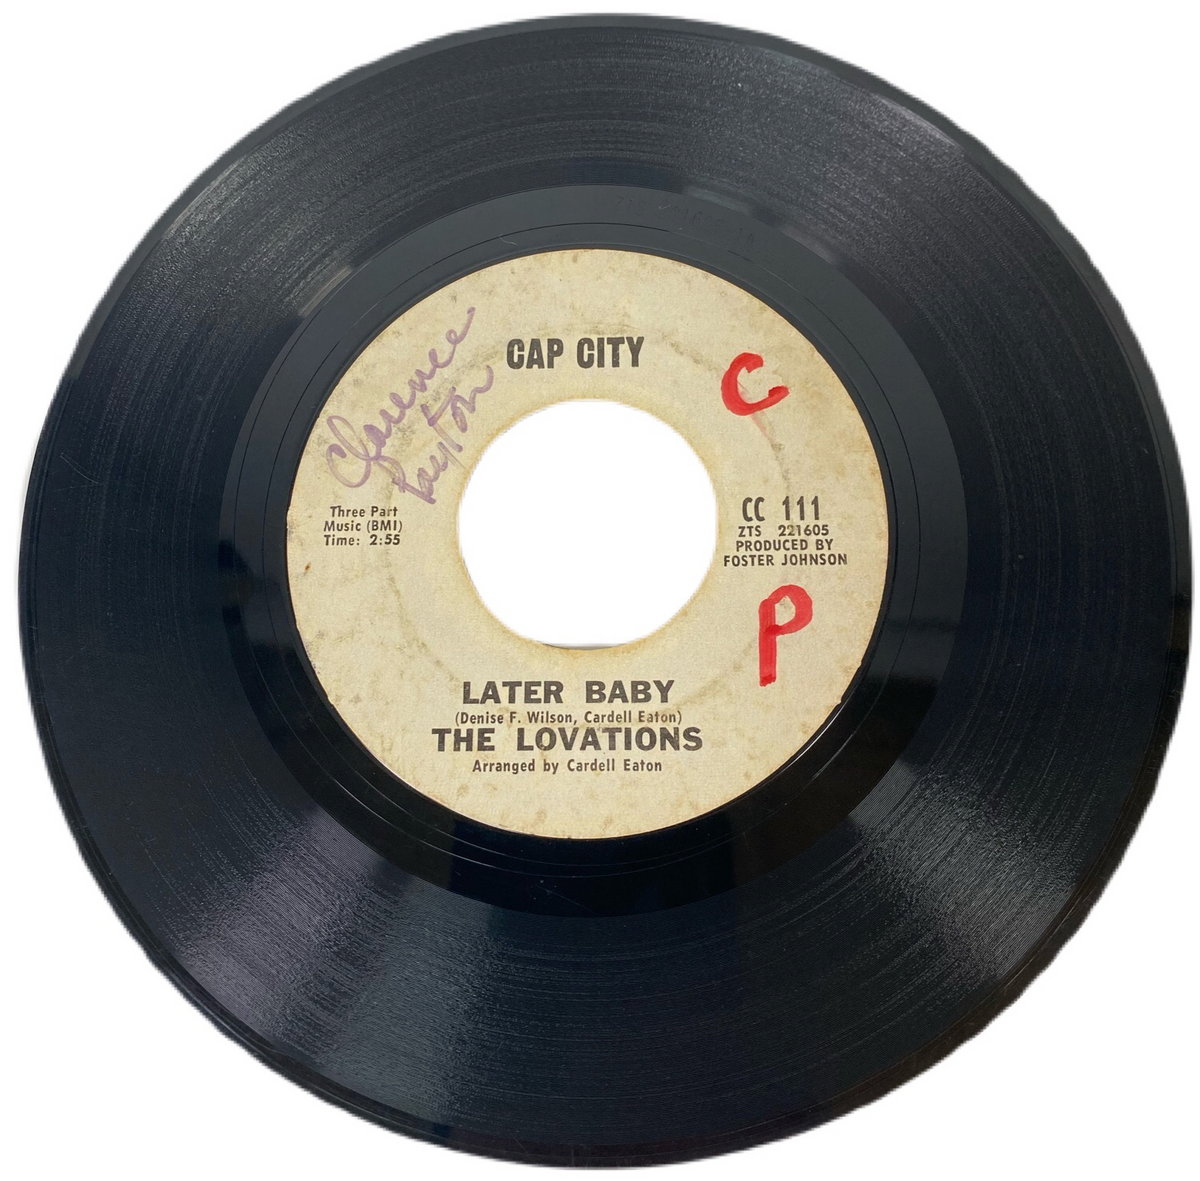 The Lovations “Later Baby” 45